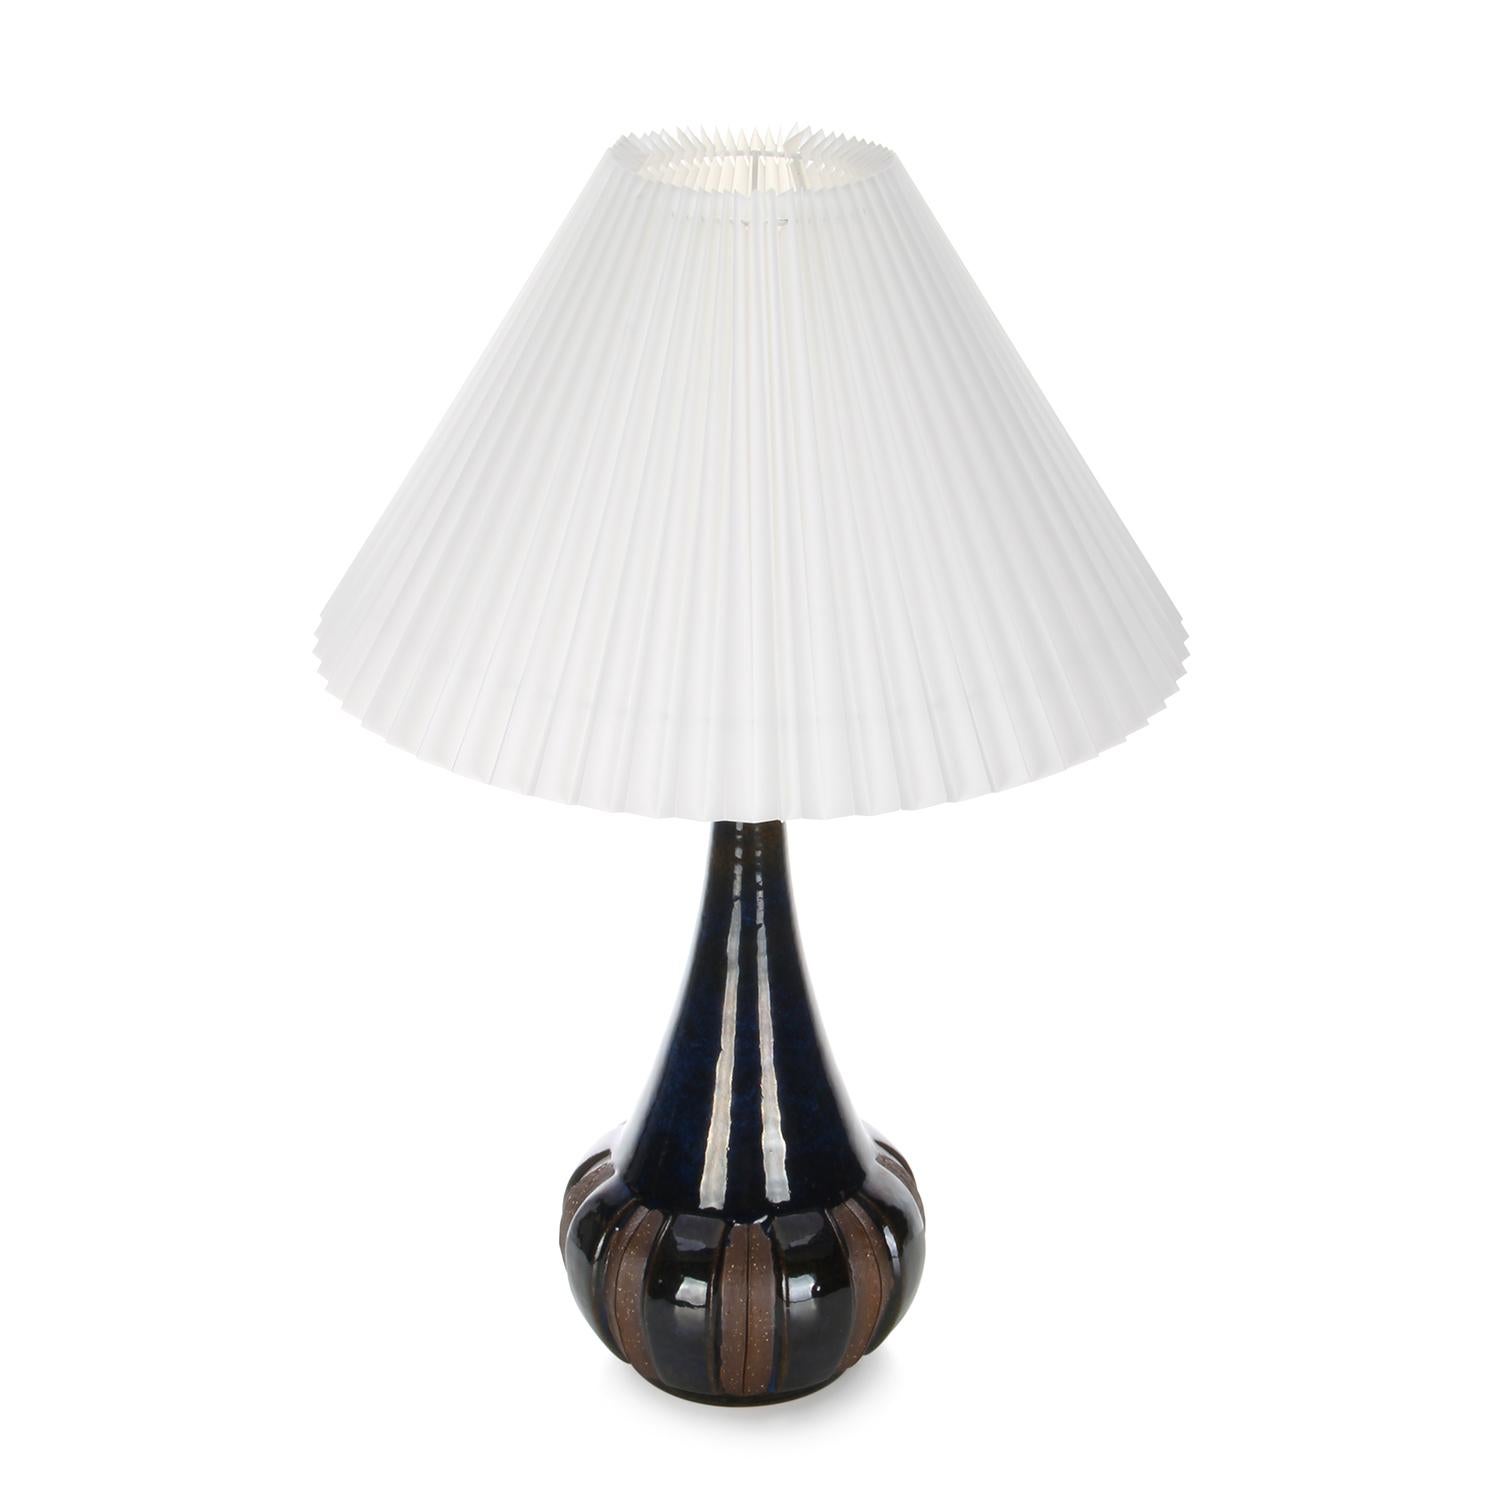 Glazed Table Lamp No. 6341 by Marianne Starck, Michael Andersen & Son 1960s, with Shade